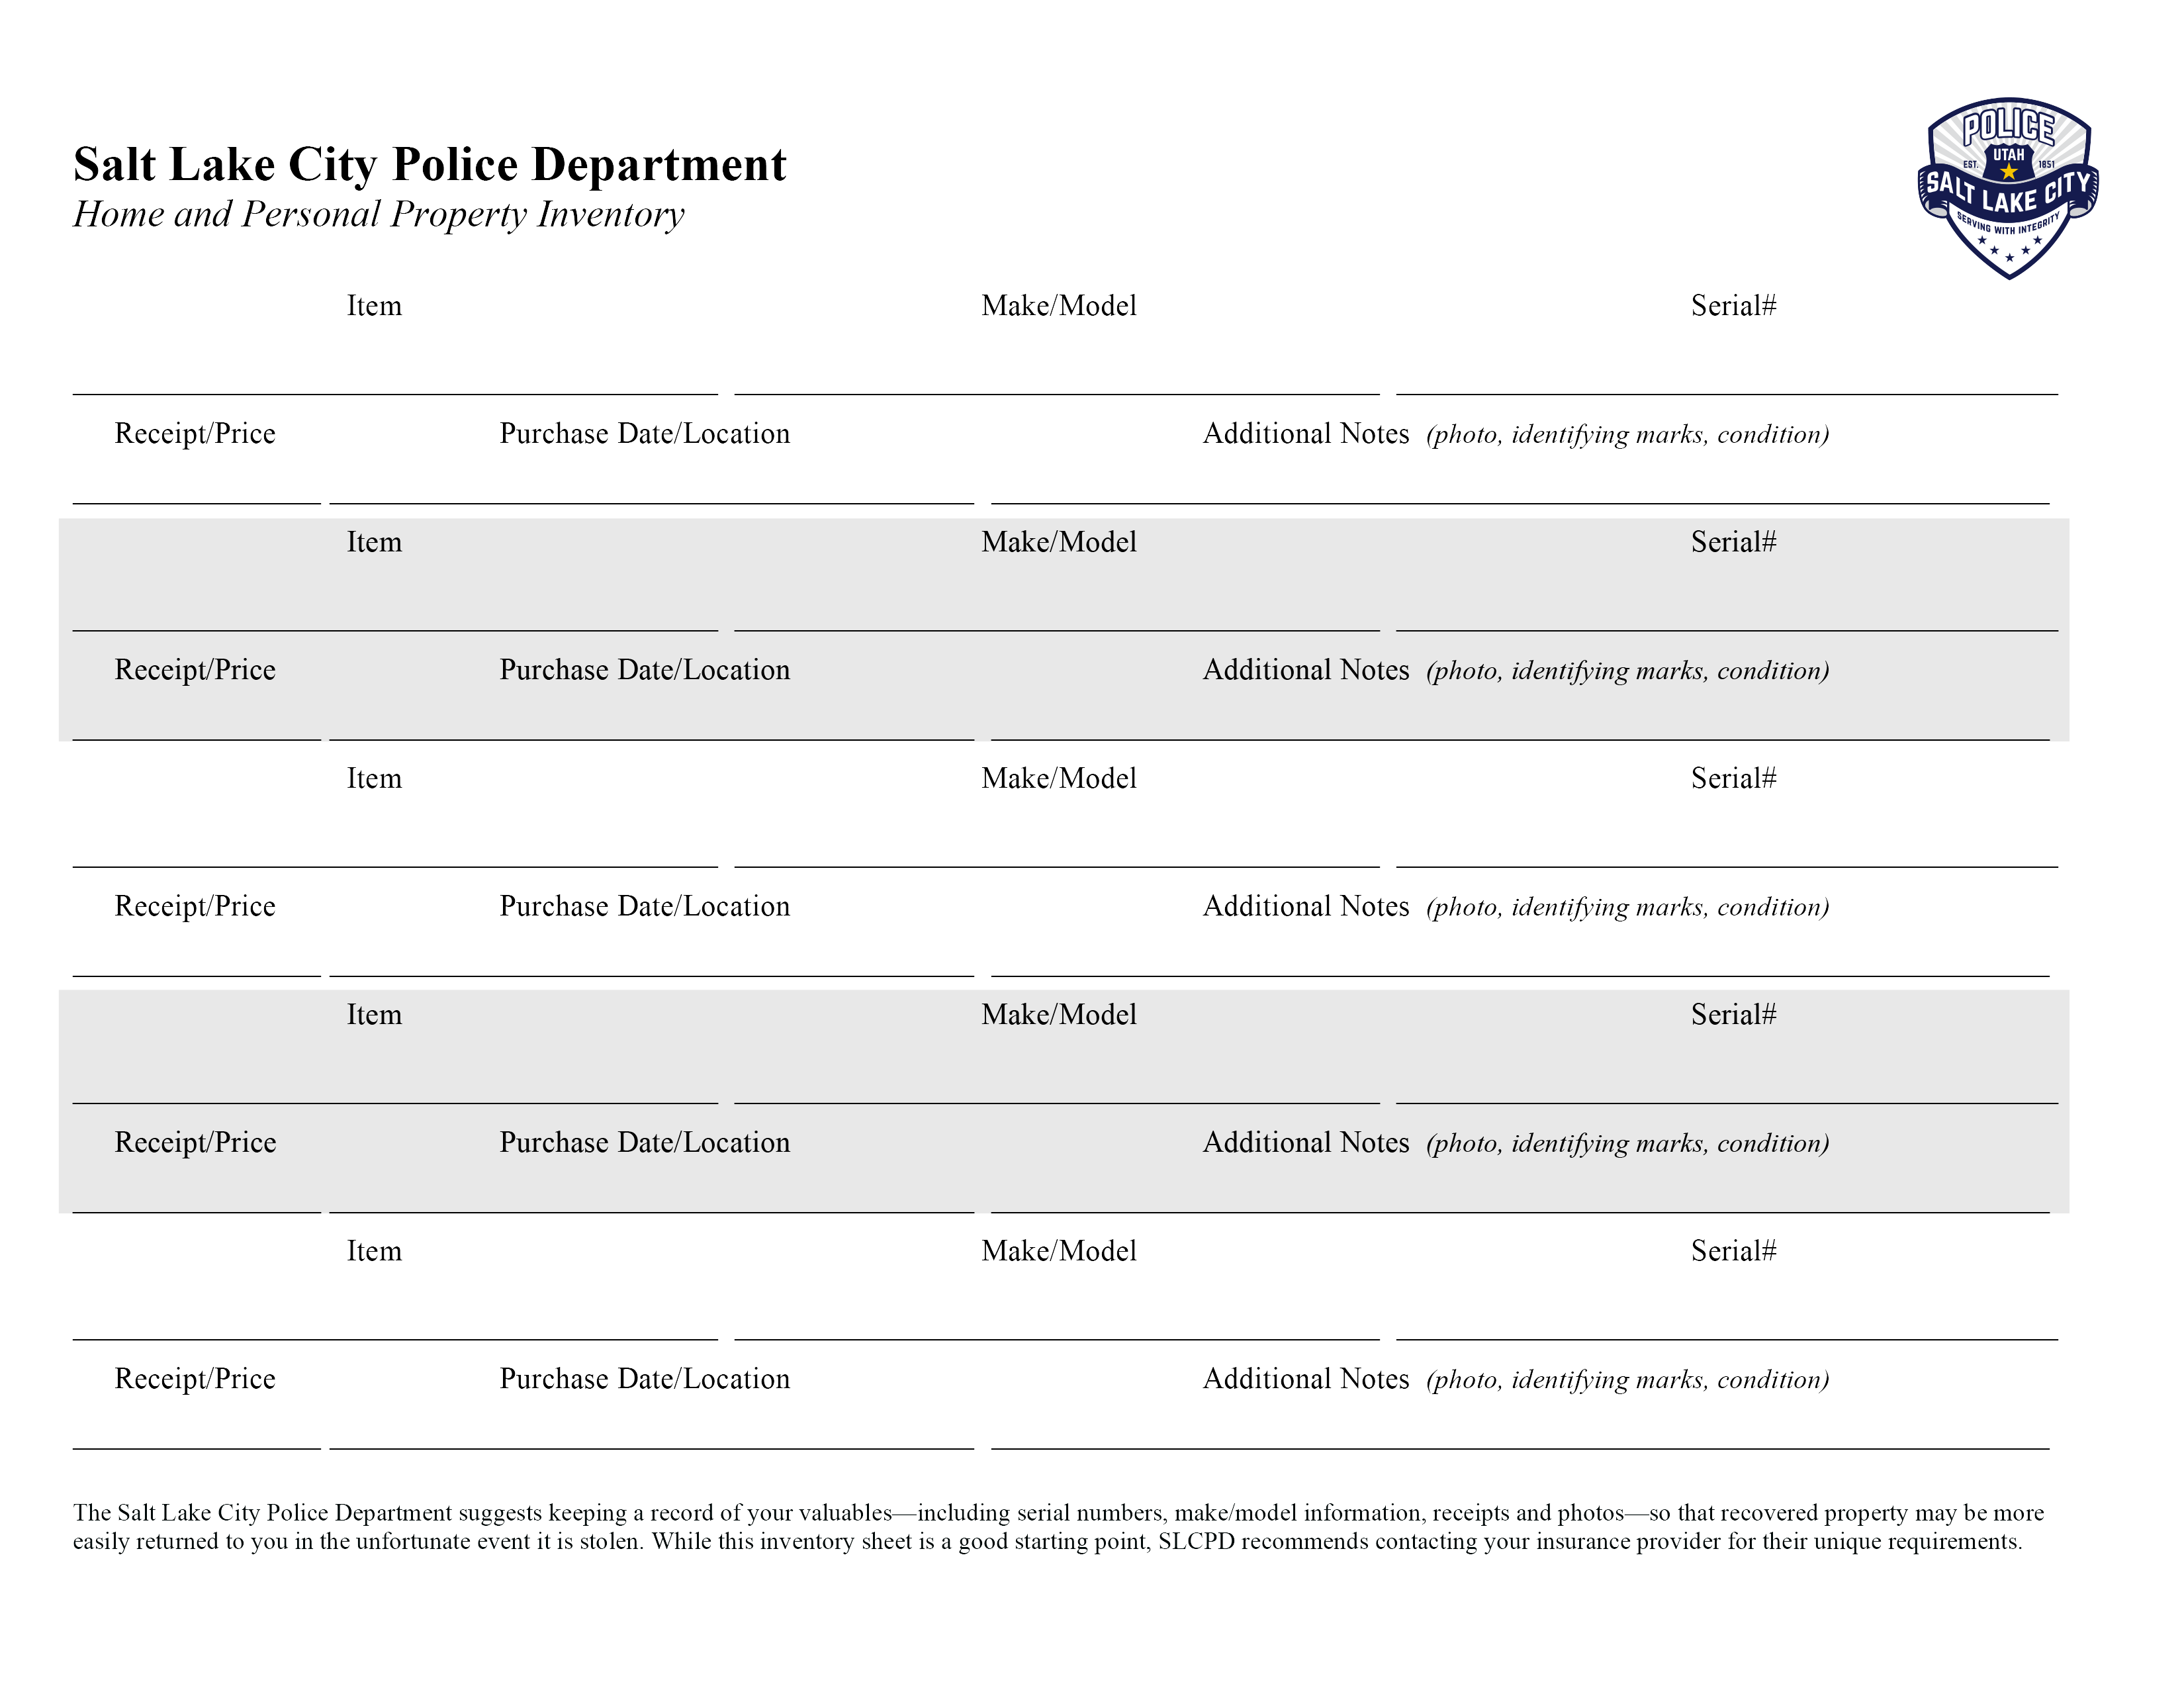 slcpd_home_inventory